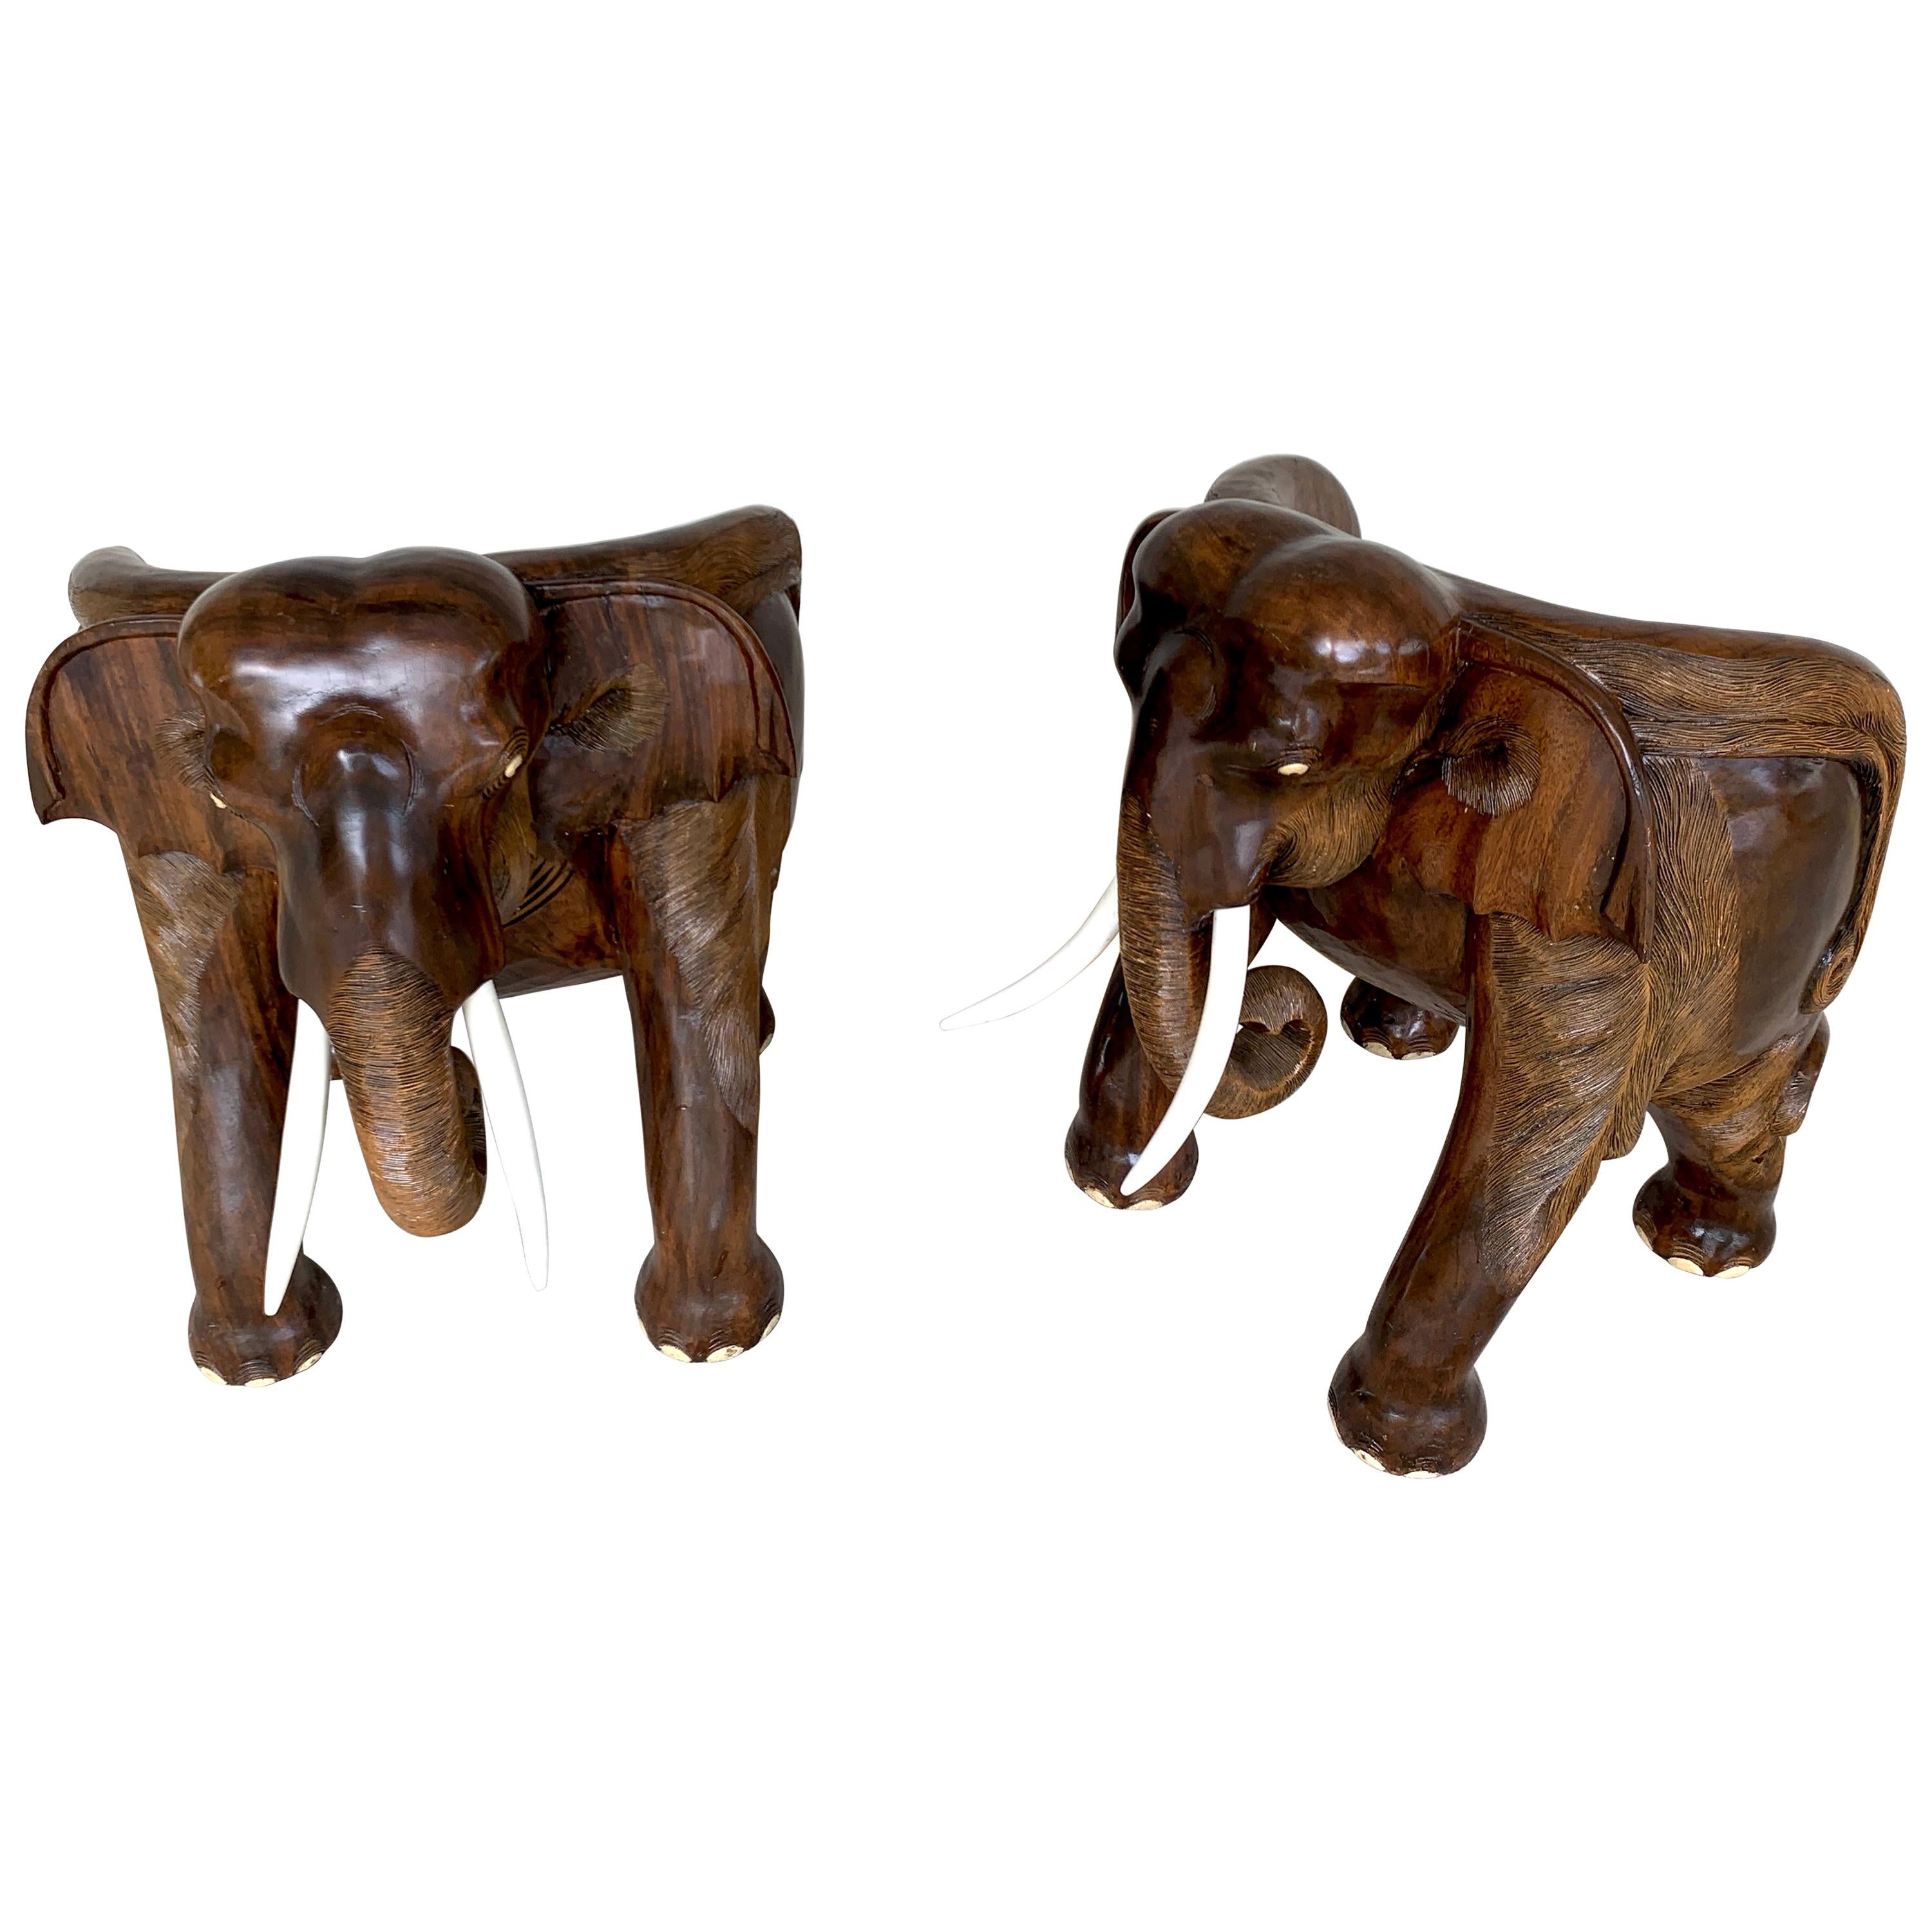 Pair of Magnificent of Late 19th Century Hardwood Carved Elephant Chairs For Sale